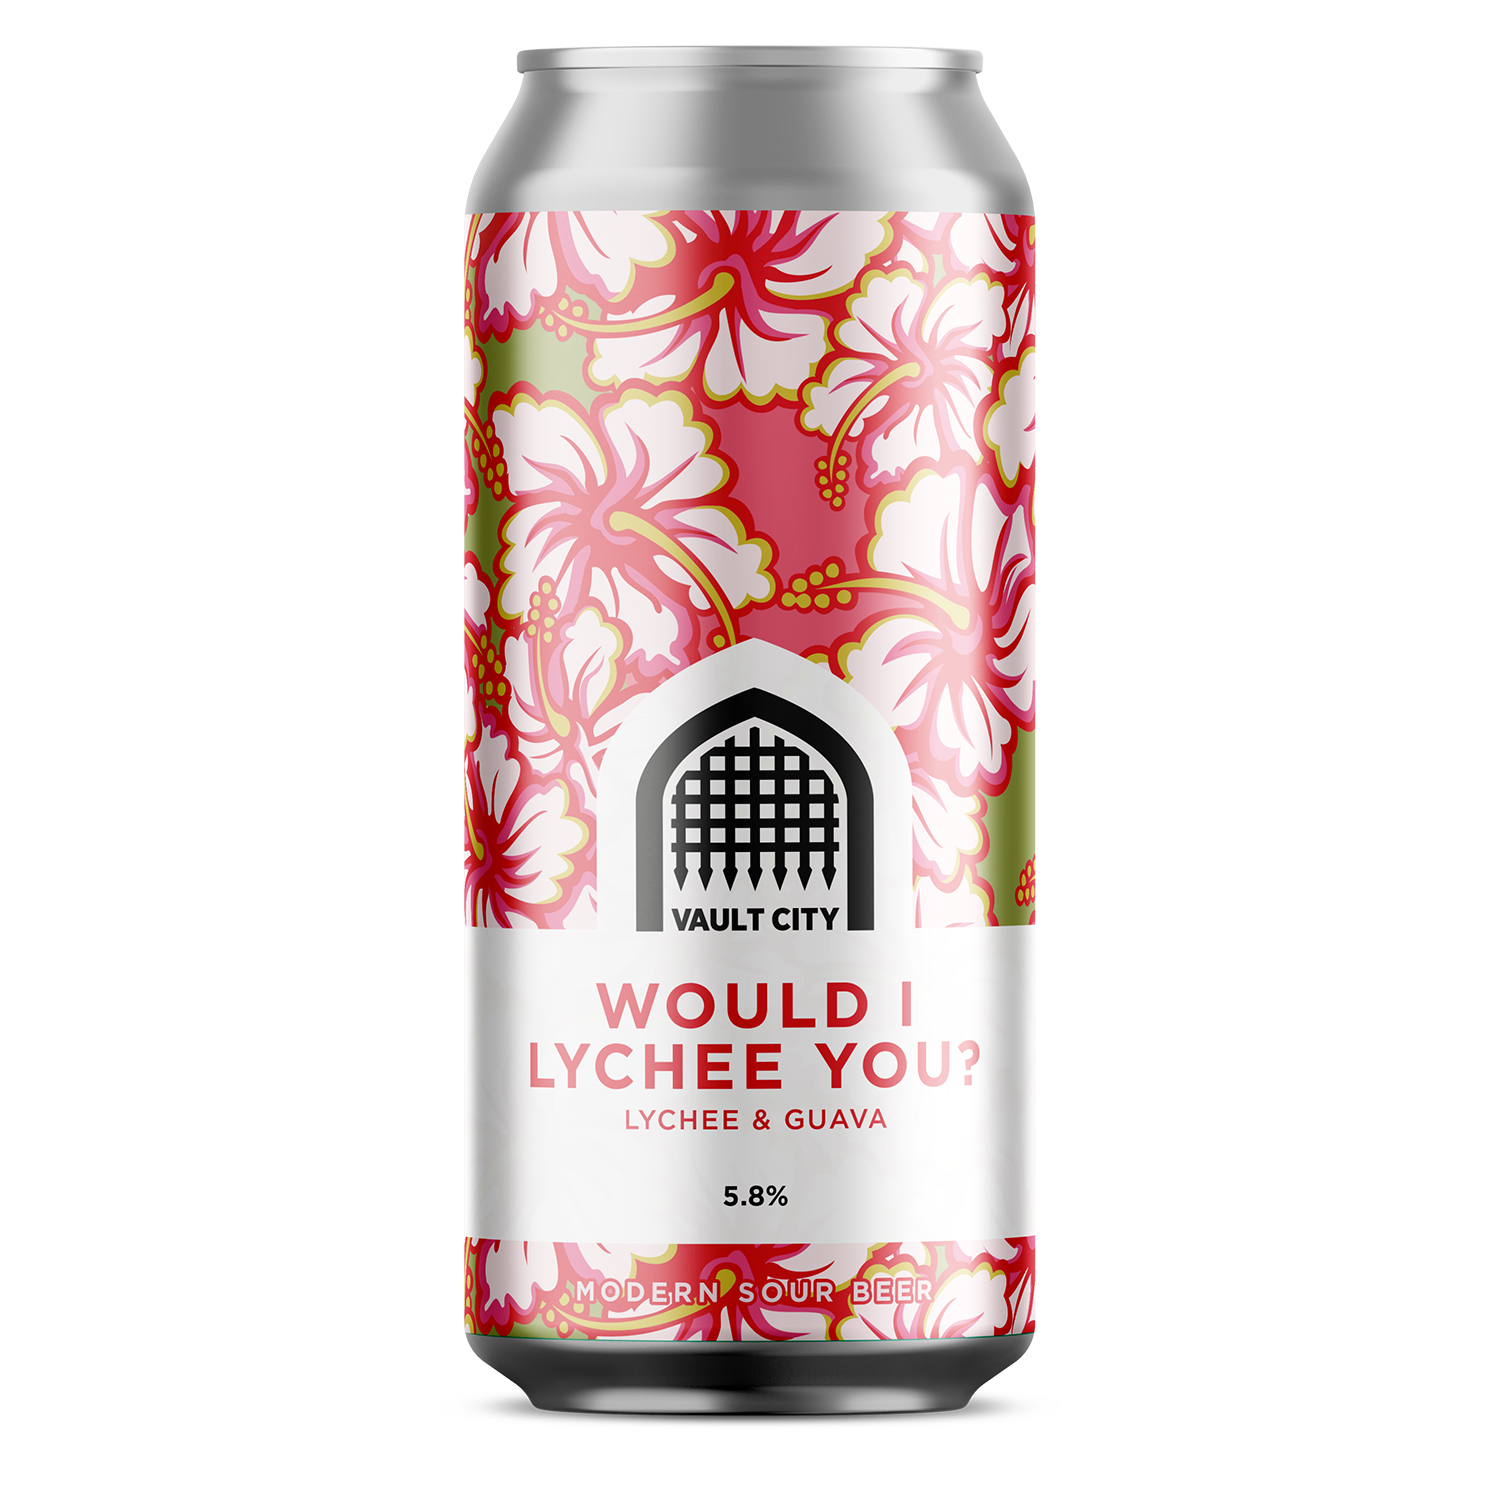 Vault City Would I Lychee You? Lychee & Guava Sour